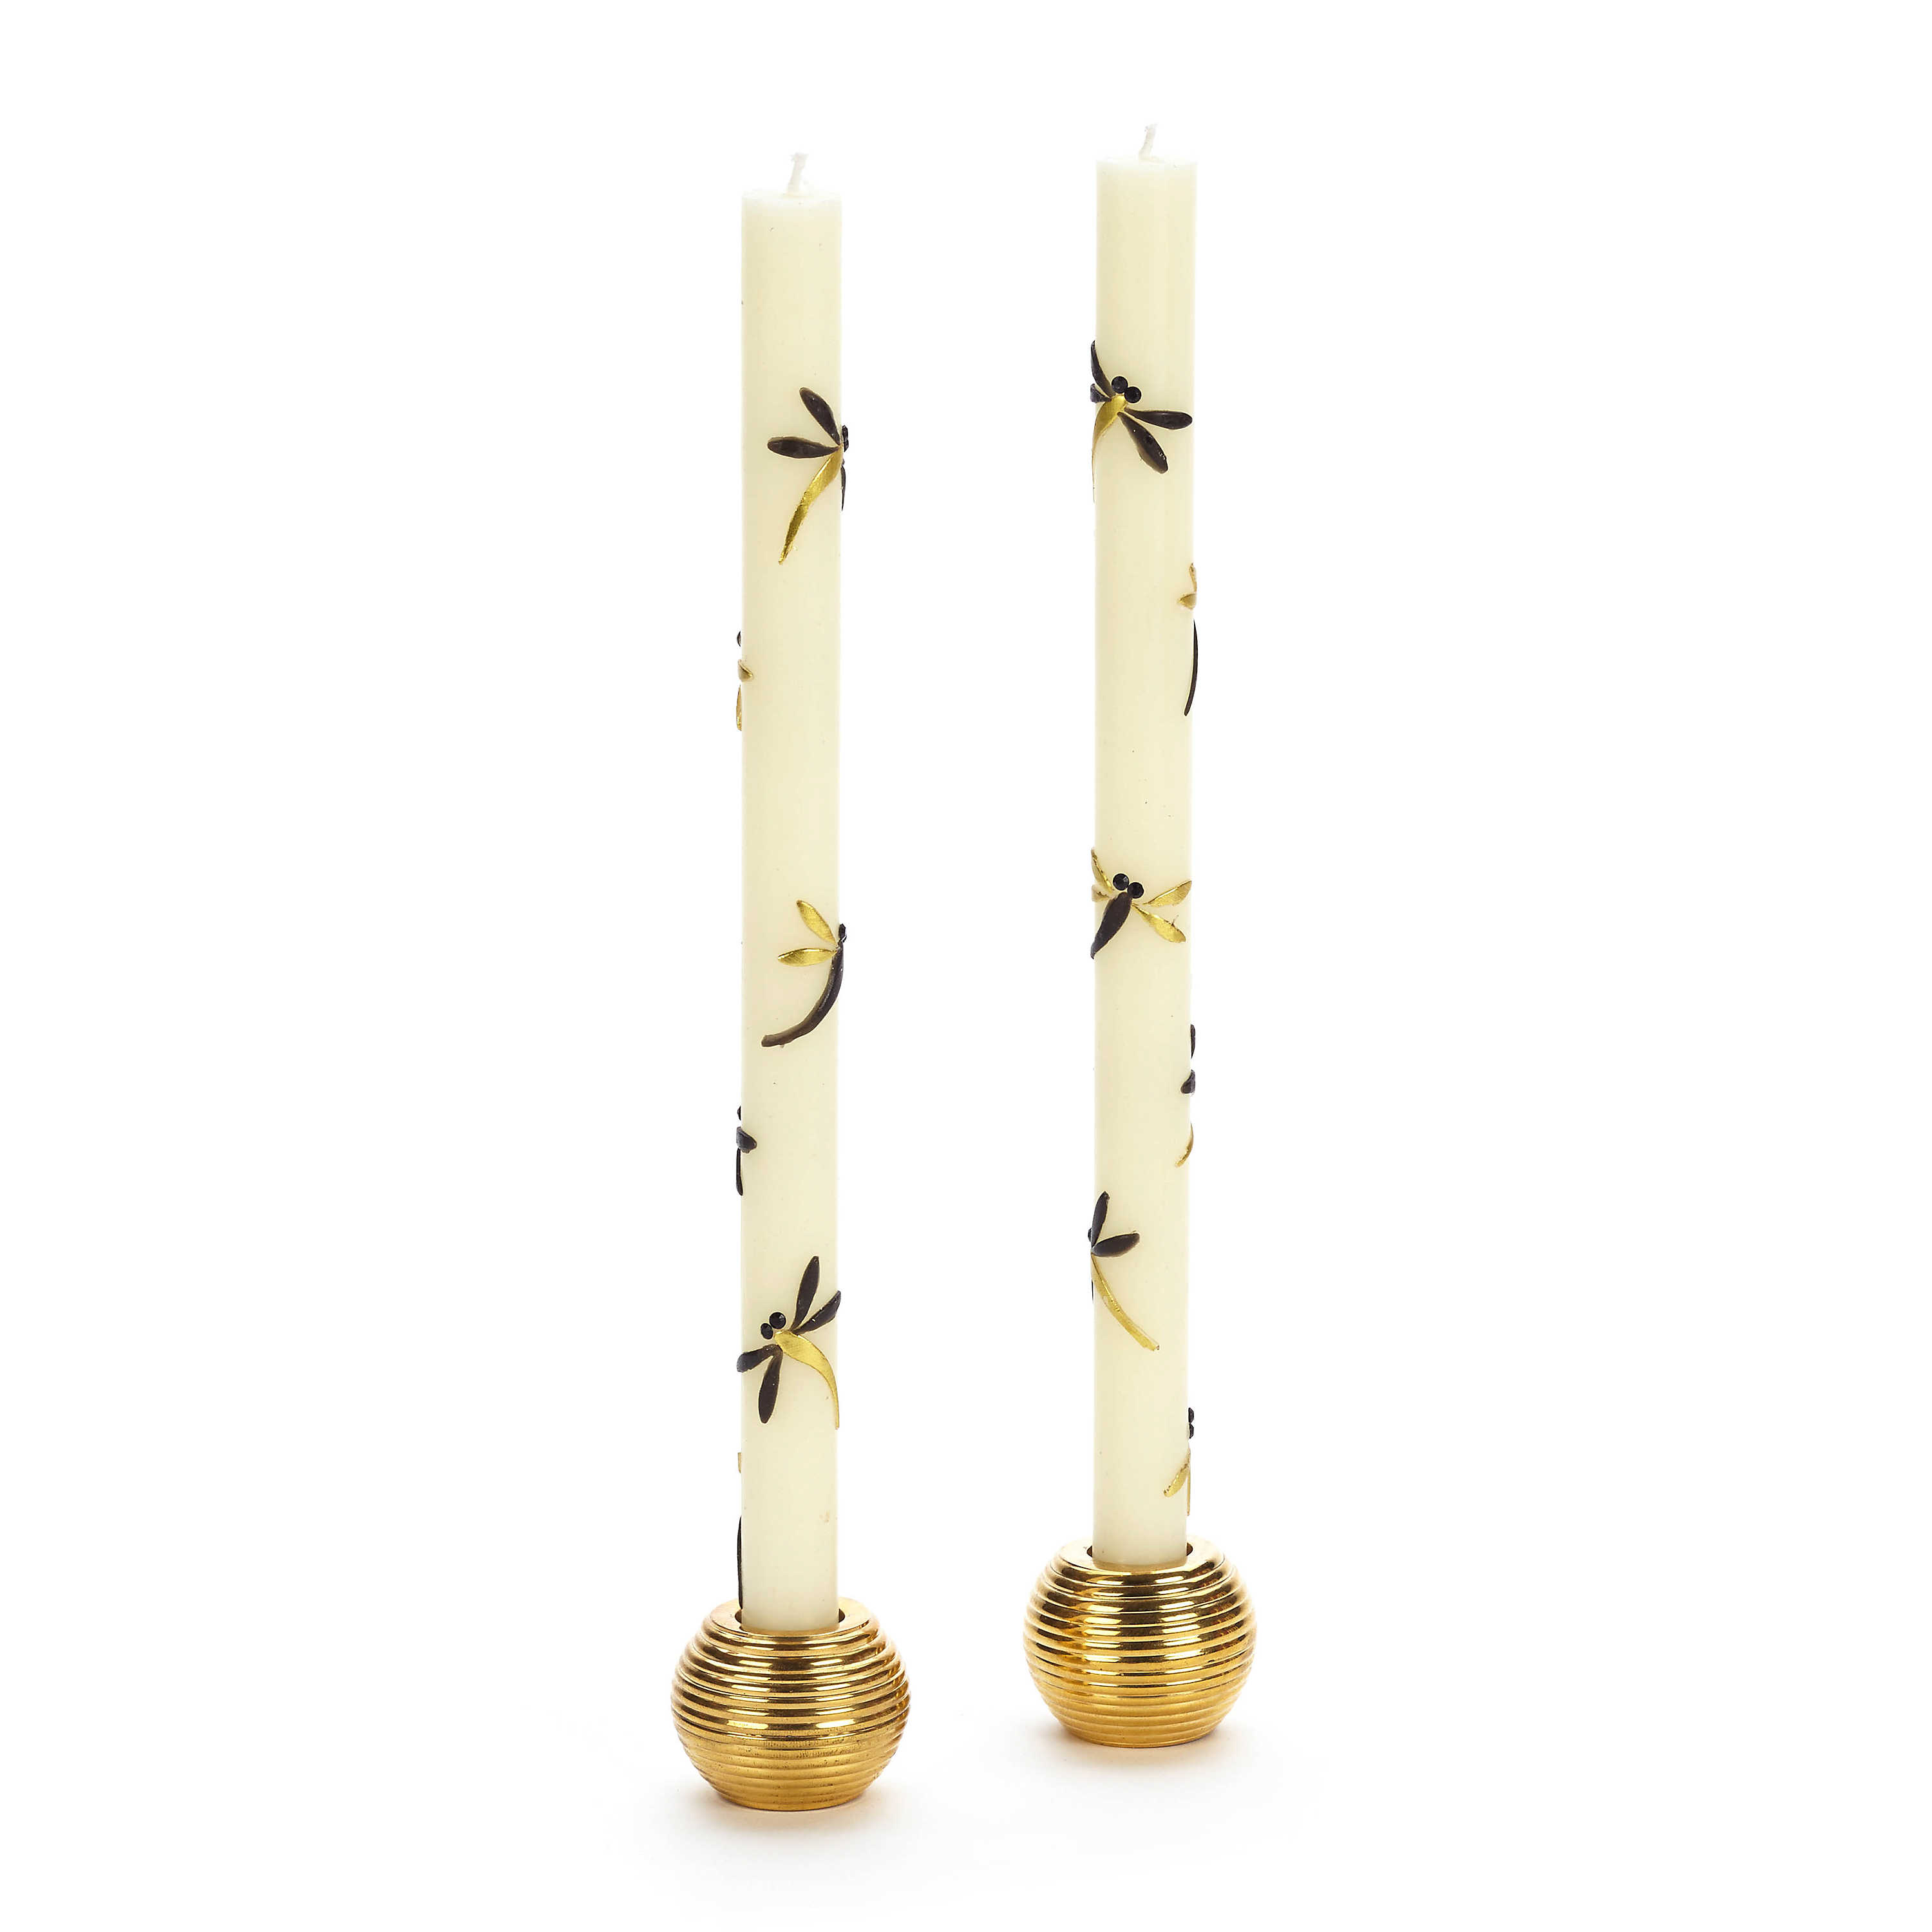 Dragonfly Dinner Candles - Black & Gold - Set of 2 mackenzie-childs Panama 0